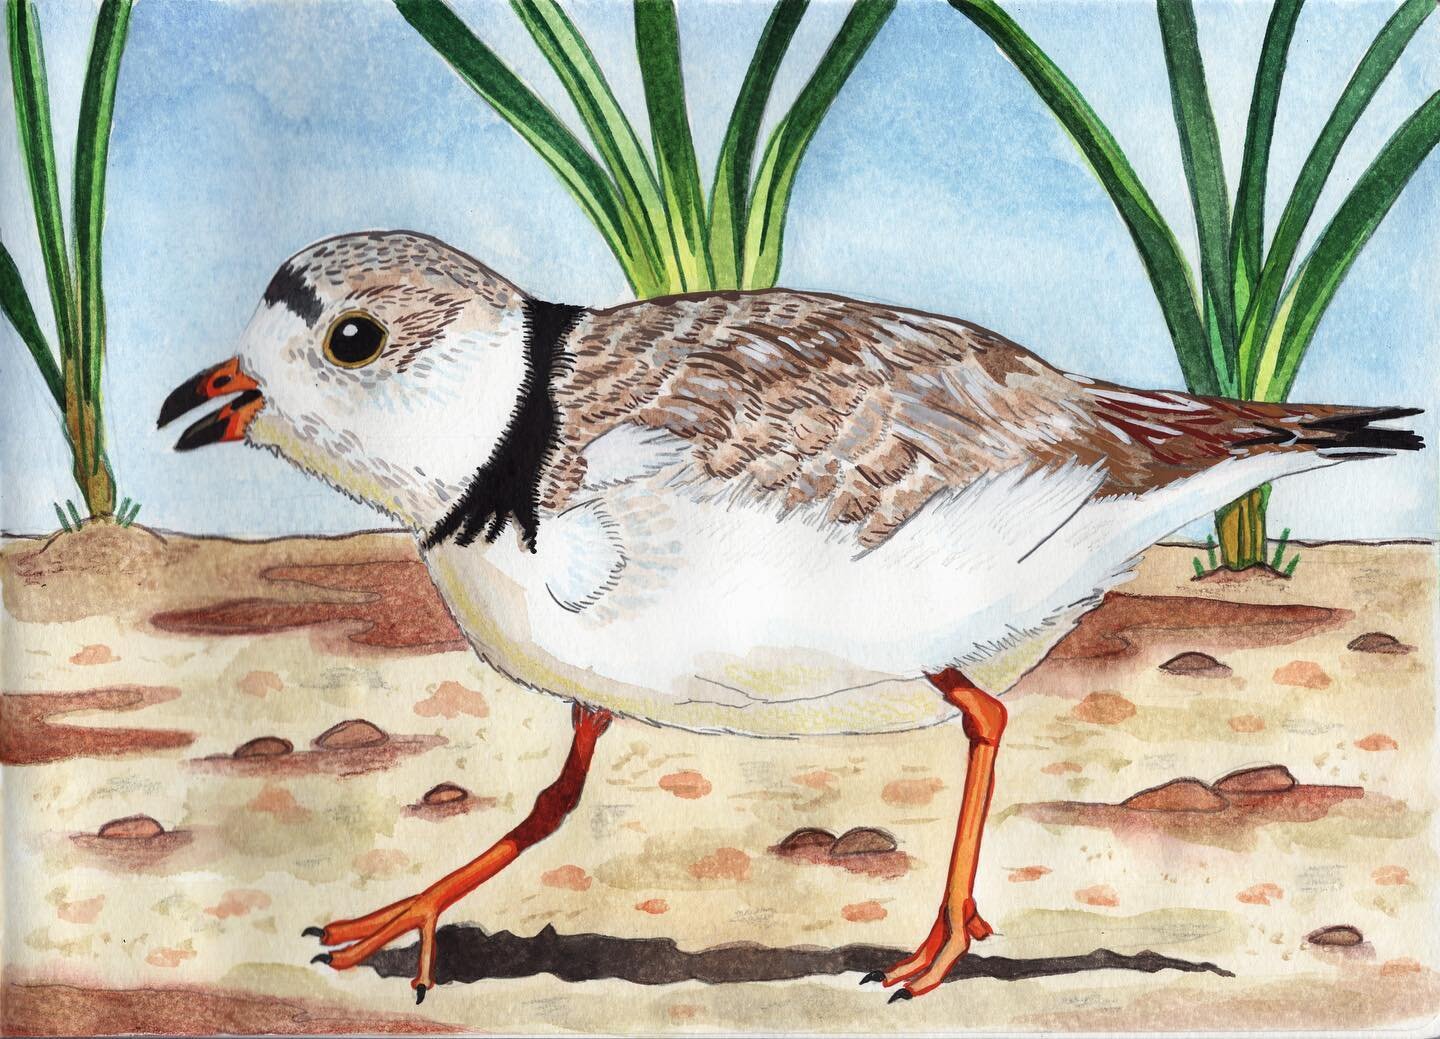 Have been obsessed with cute little Piping Plovers since the start of summer. Let&rsquo;s continue to look after these guys on the beach with what summer we have left!
#sharetheshore #pipingplover #protecttheplovers 
.
.
.
.
.
.
.
#watercolorpainting